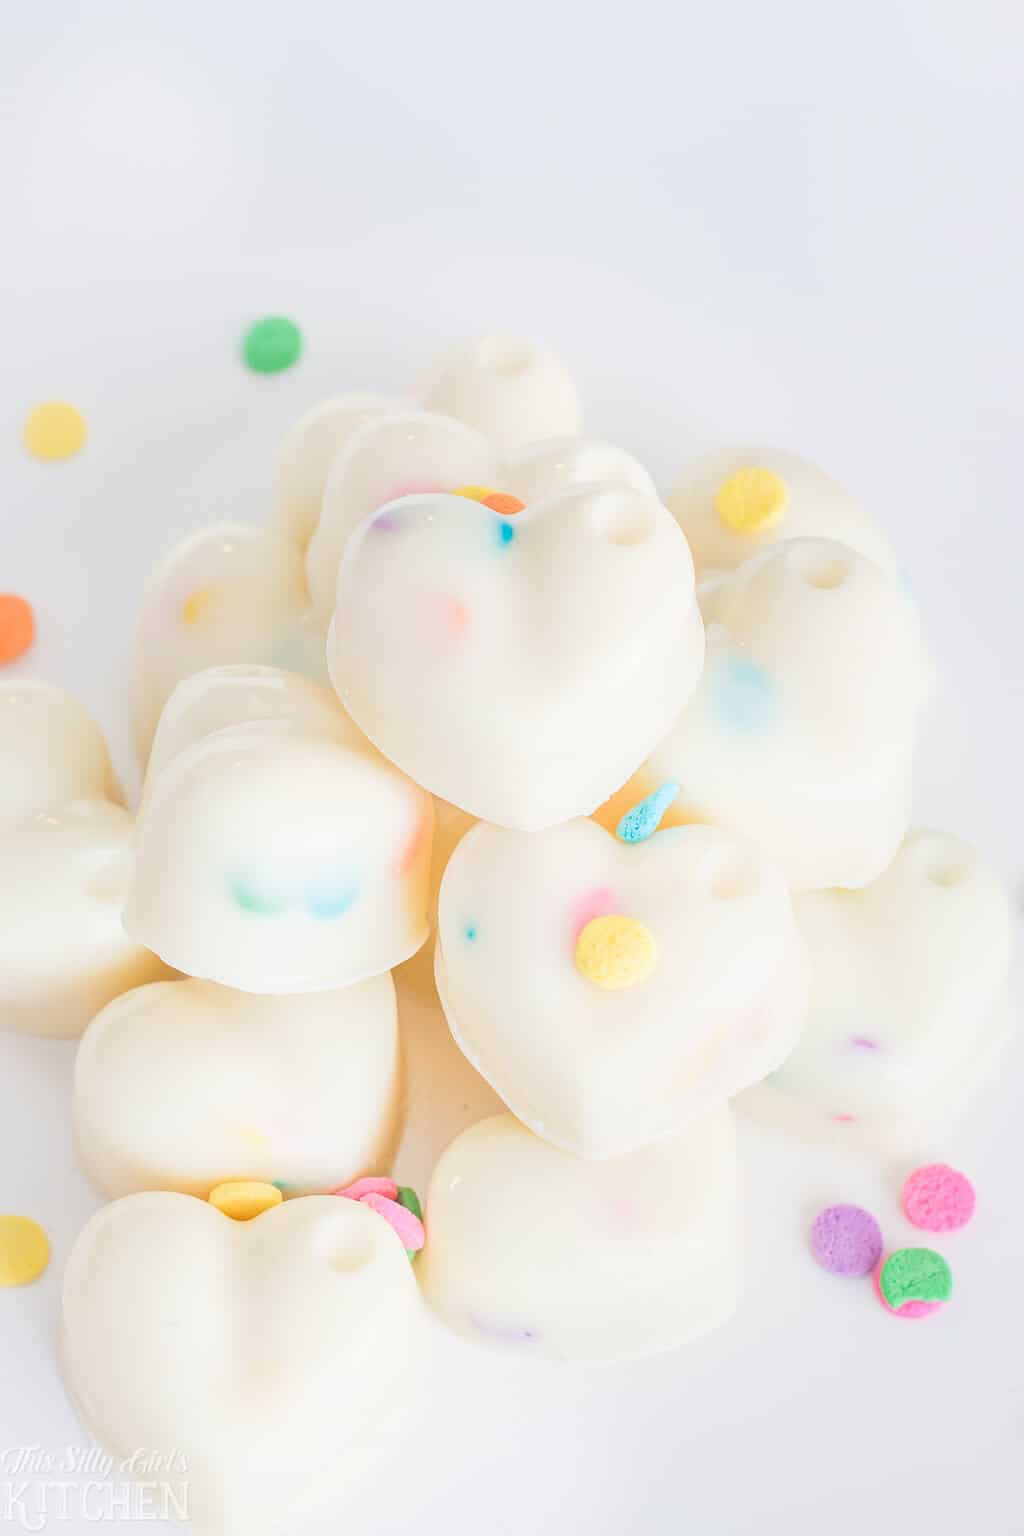 #Funfetti truffles, made with white chocolate #ganache, these are an easy, fun candy you can make at home! #Recipe from ThisSillyGirlsKitchen.com #whitechocolate #truffles #valentinesday #candy